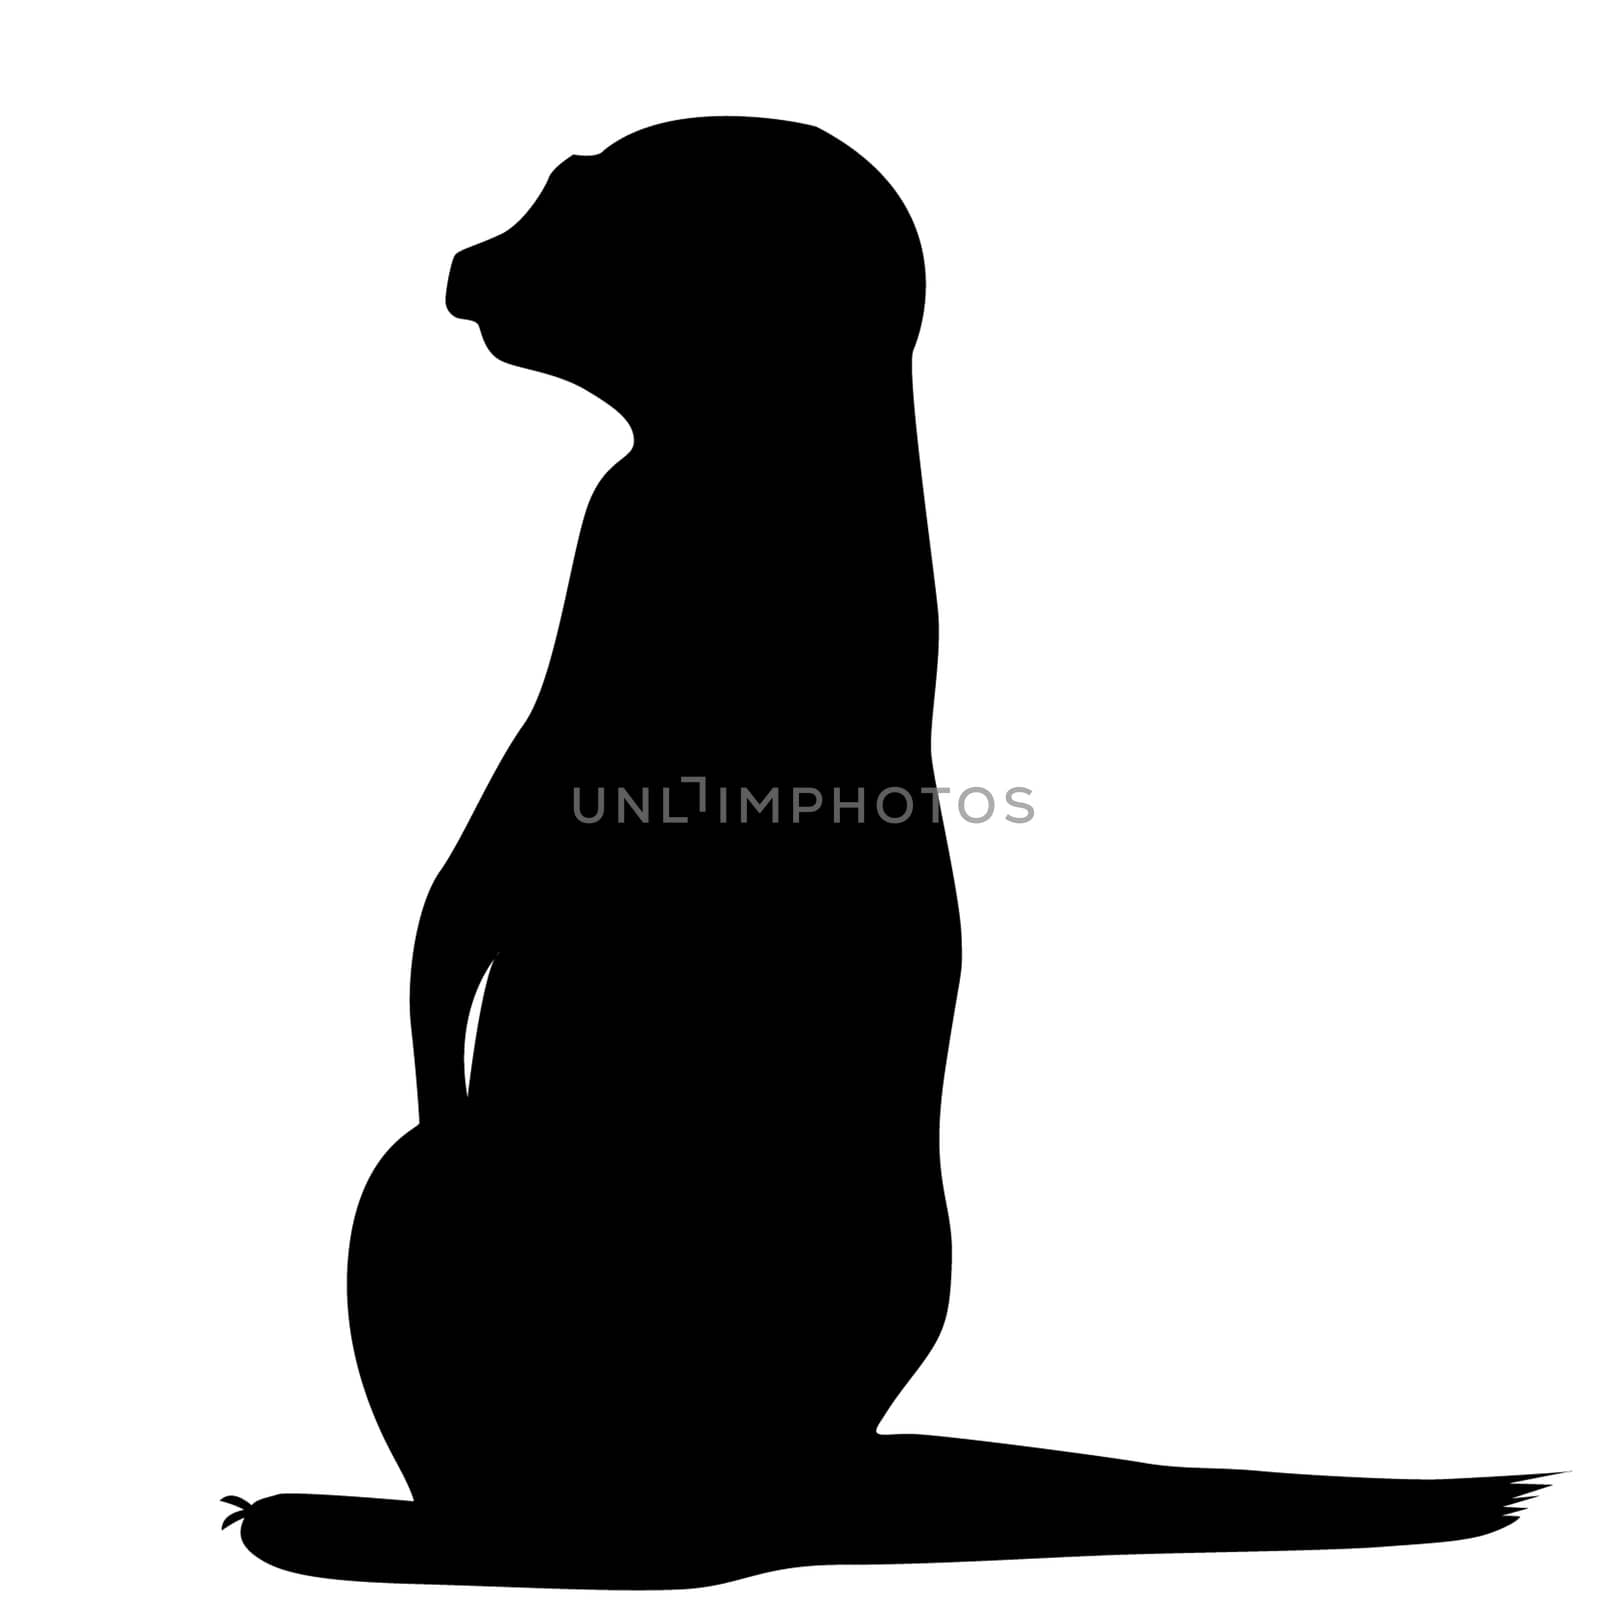 Meerkat silhouette isolated on white background